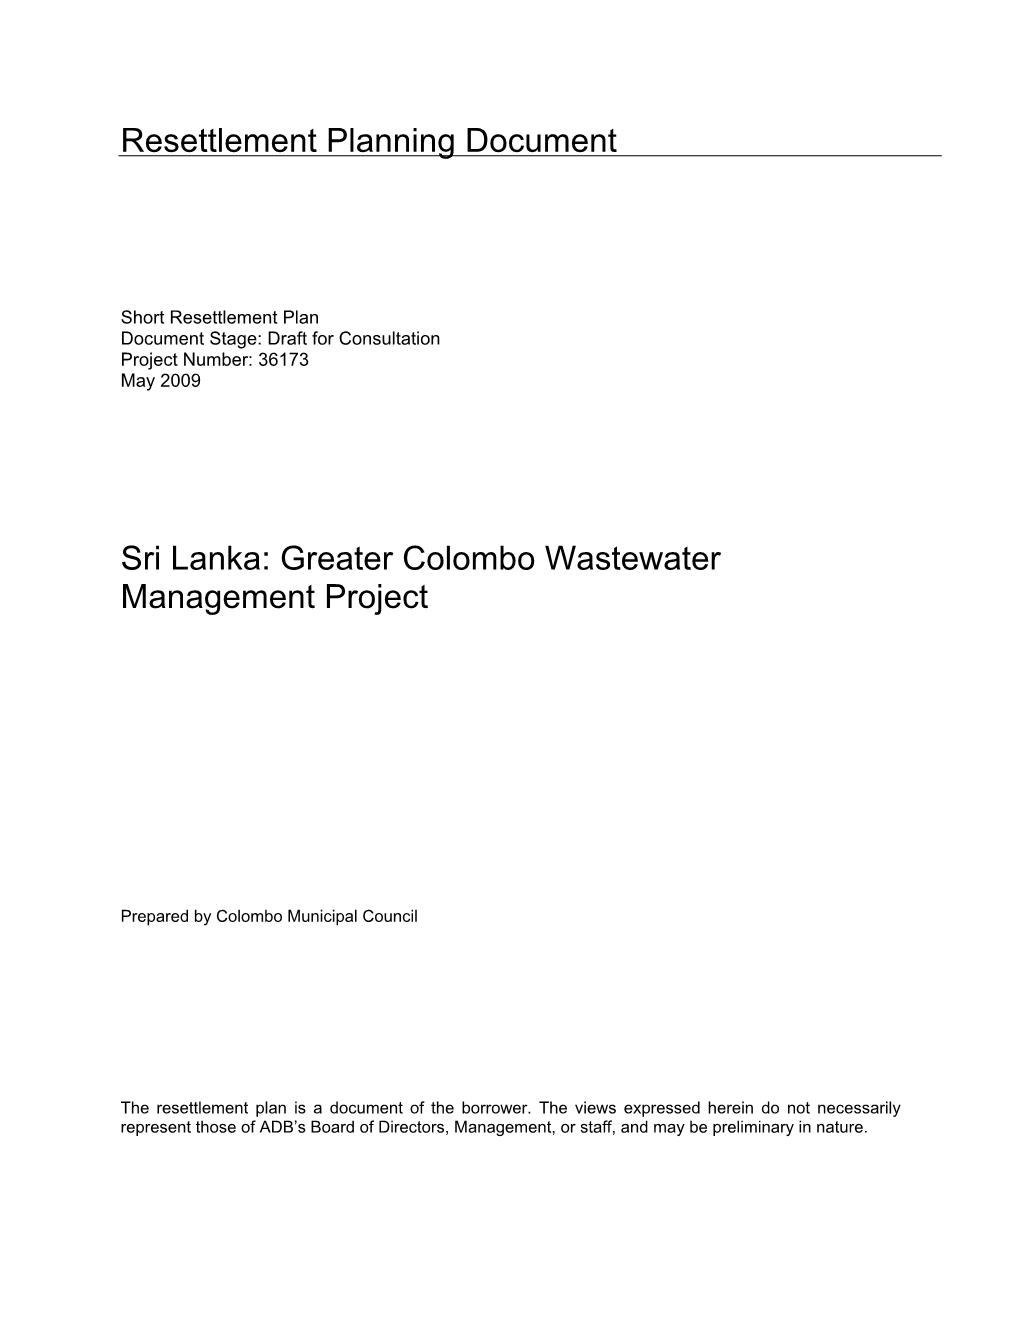 Sri Lanka: Greater Colombo Wastewater Management Project